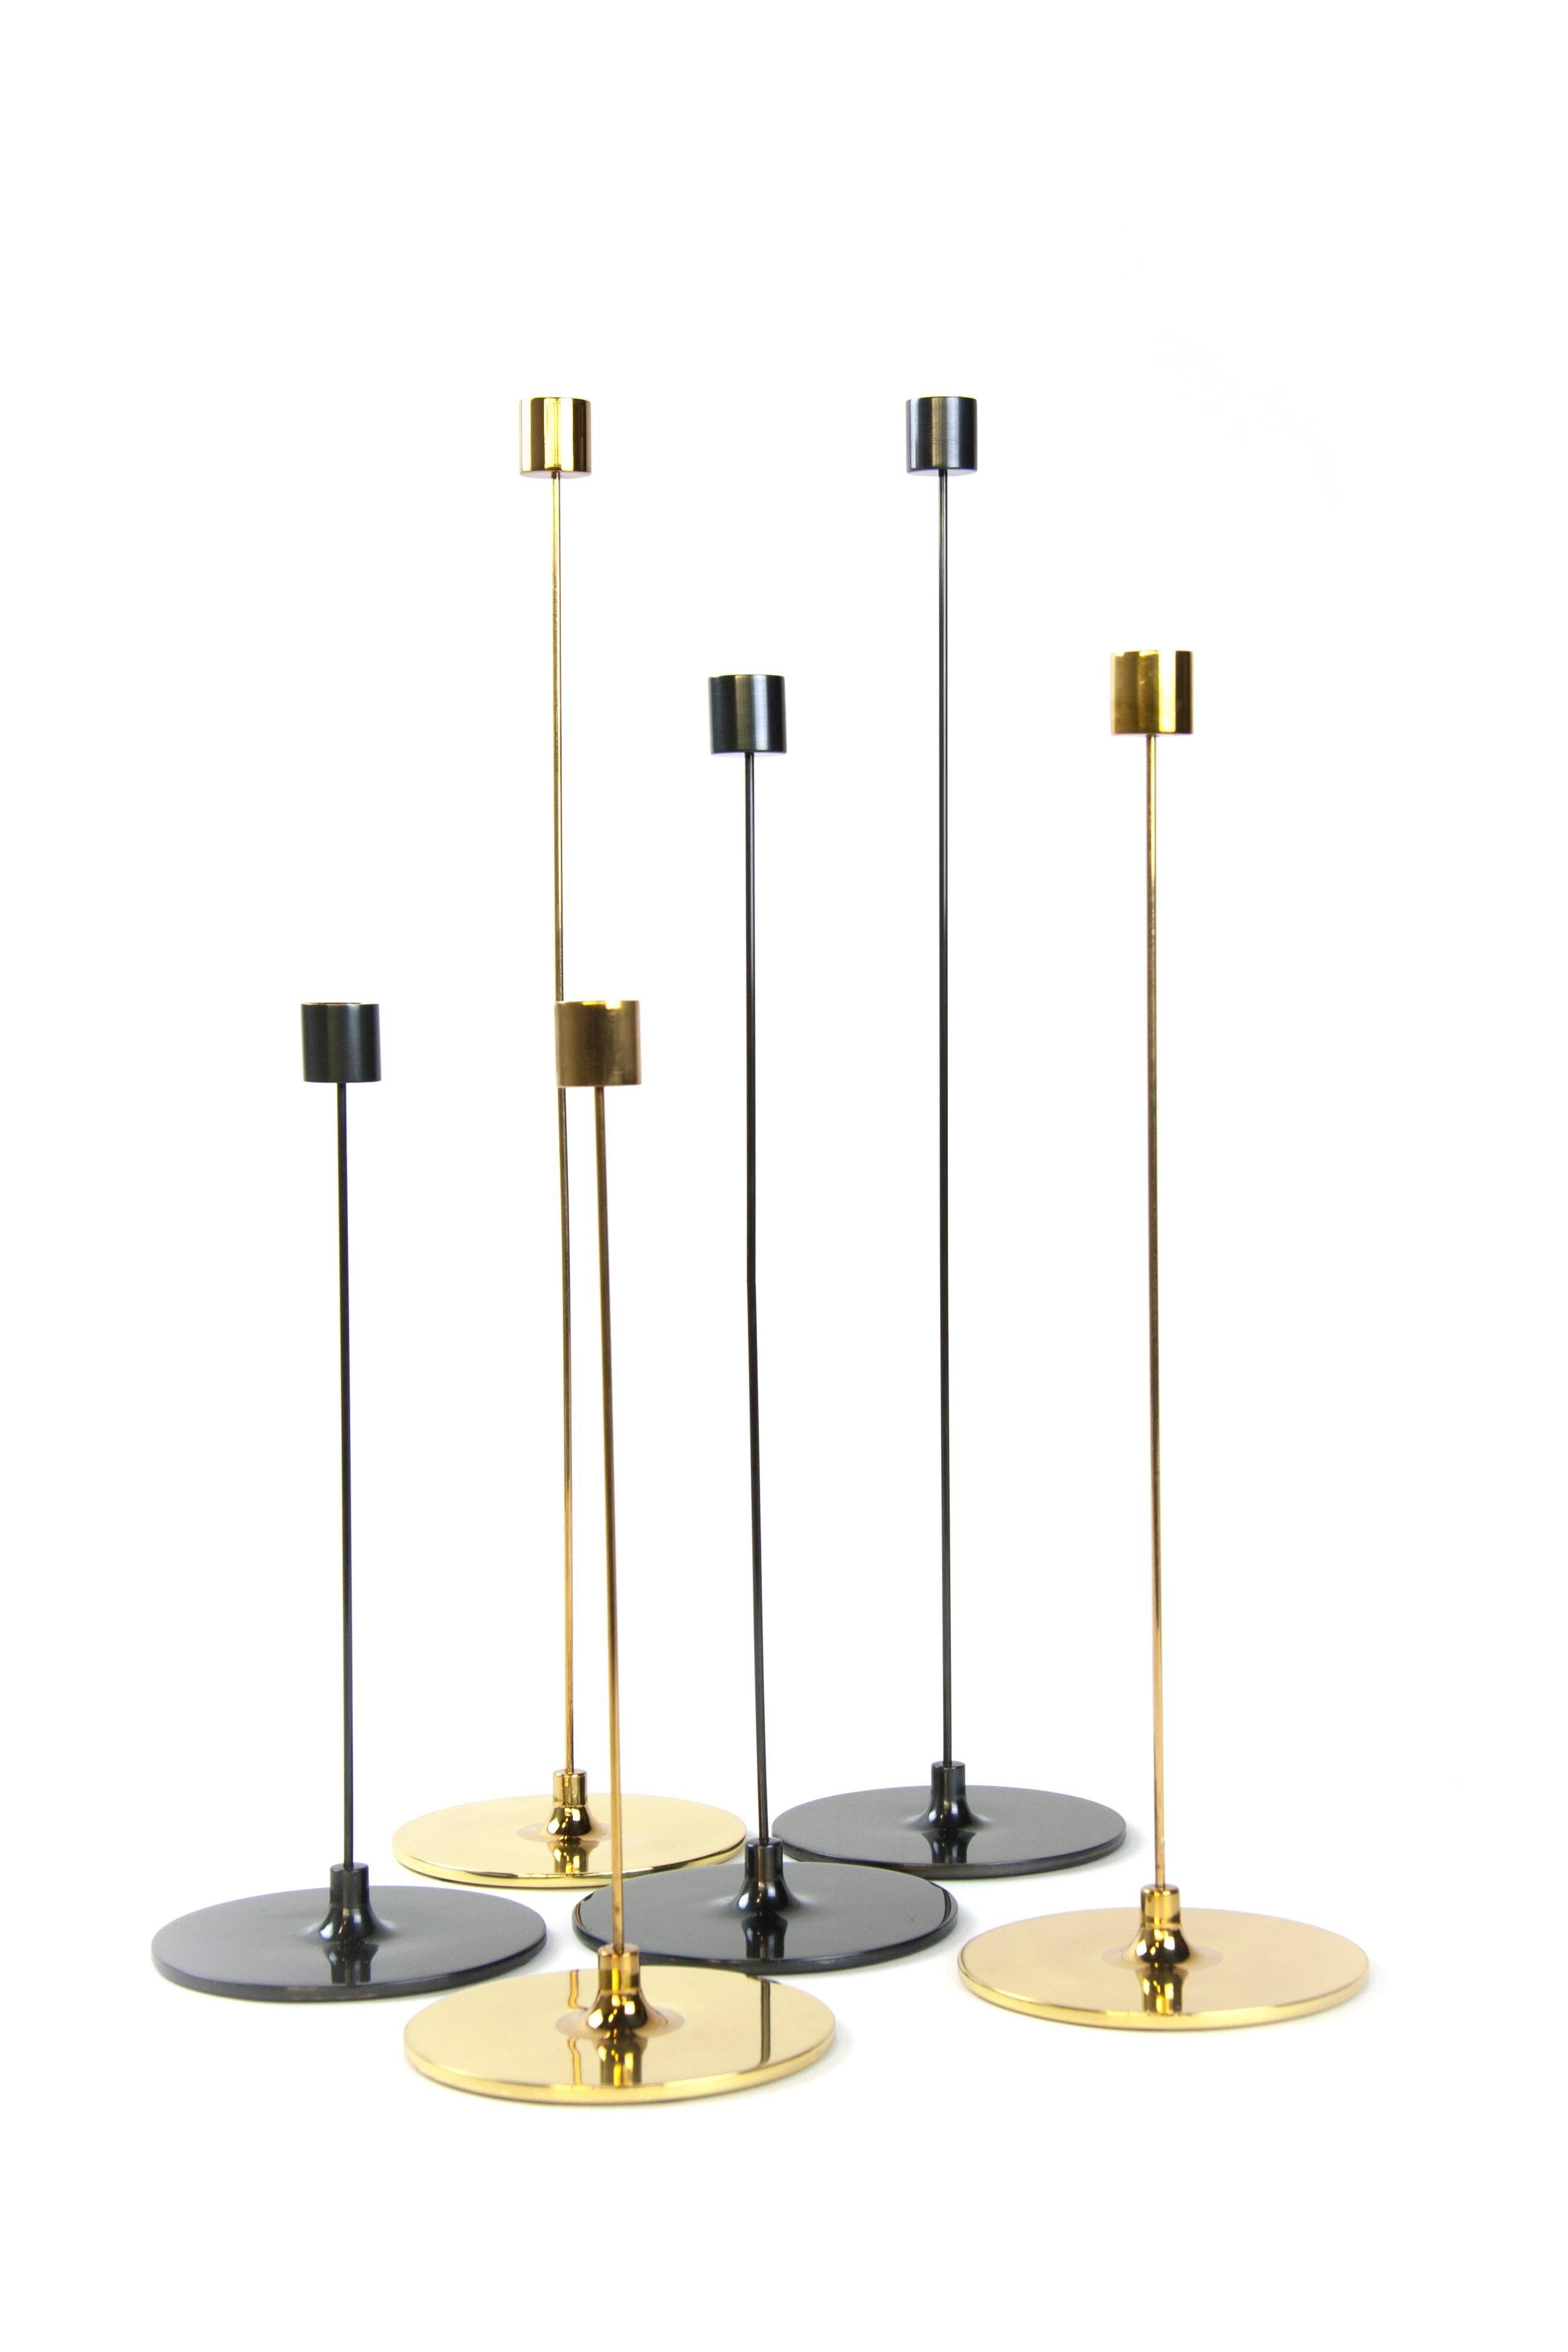 Small pin darkened brass candlestick by Gentner Design
Dimensions: D 12.7 x H 30.5 cm
Materials: darkened brass
Available in polished tarnished brass and darkened brass.
Available in small, medium and large.

With an 12”, 16”, or 20” height,